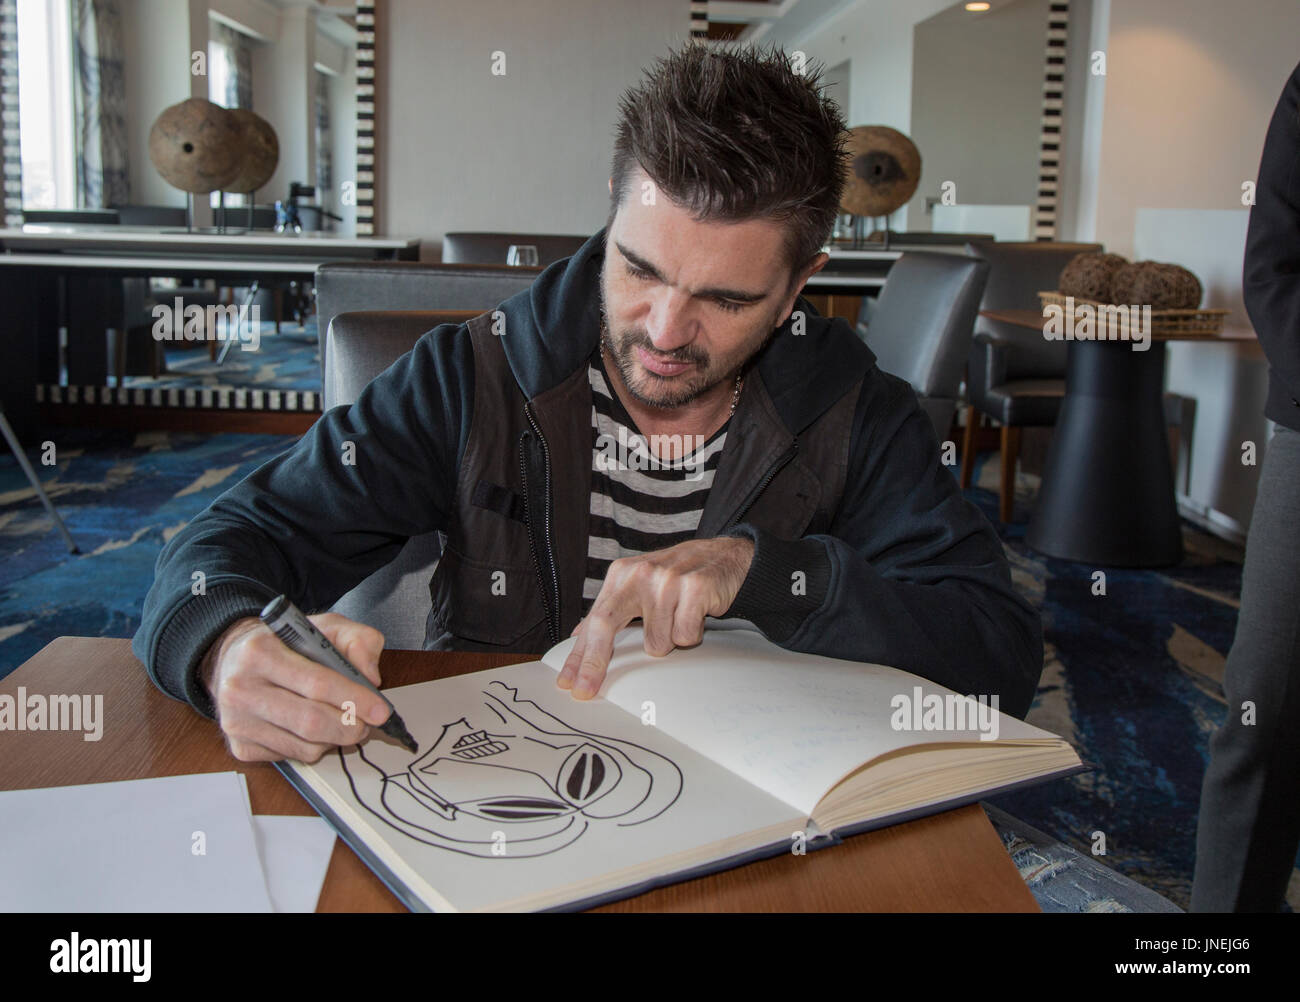 Managua, Nicaragua. 28th July, 2017. dpatop - Colombian pop singer Juanes, photographed during an interview on the occasion of his Latin America tour in Managua, Nicaragua, 28 July 2017. Juanes, known for his song 'La Camisa Negra', is very worried about the dramatic situation of the people in Venezuela and the escalation of violence. Photo: Miguel Alvarez/dpa/Alamy Live News Stock Photo